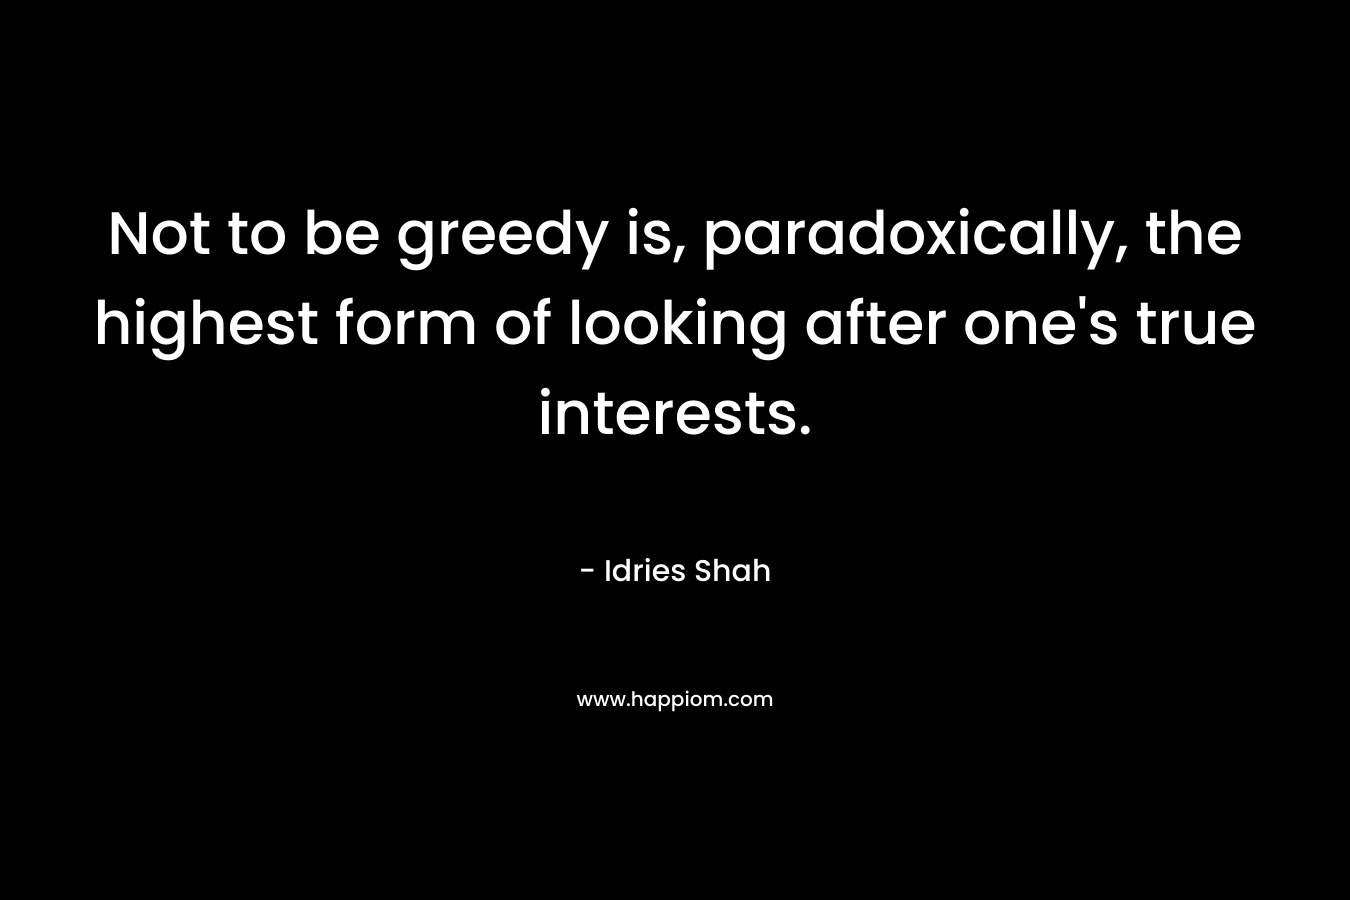 Not to be greedy is, paradoxically, the highest form of looking after one’s true interests. – Idries Shah